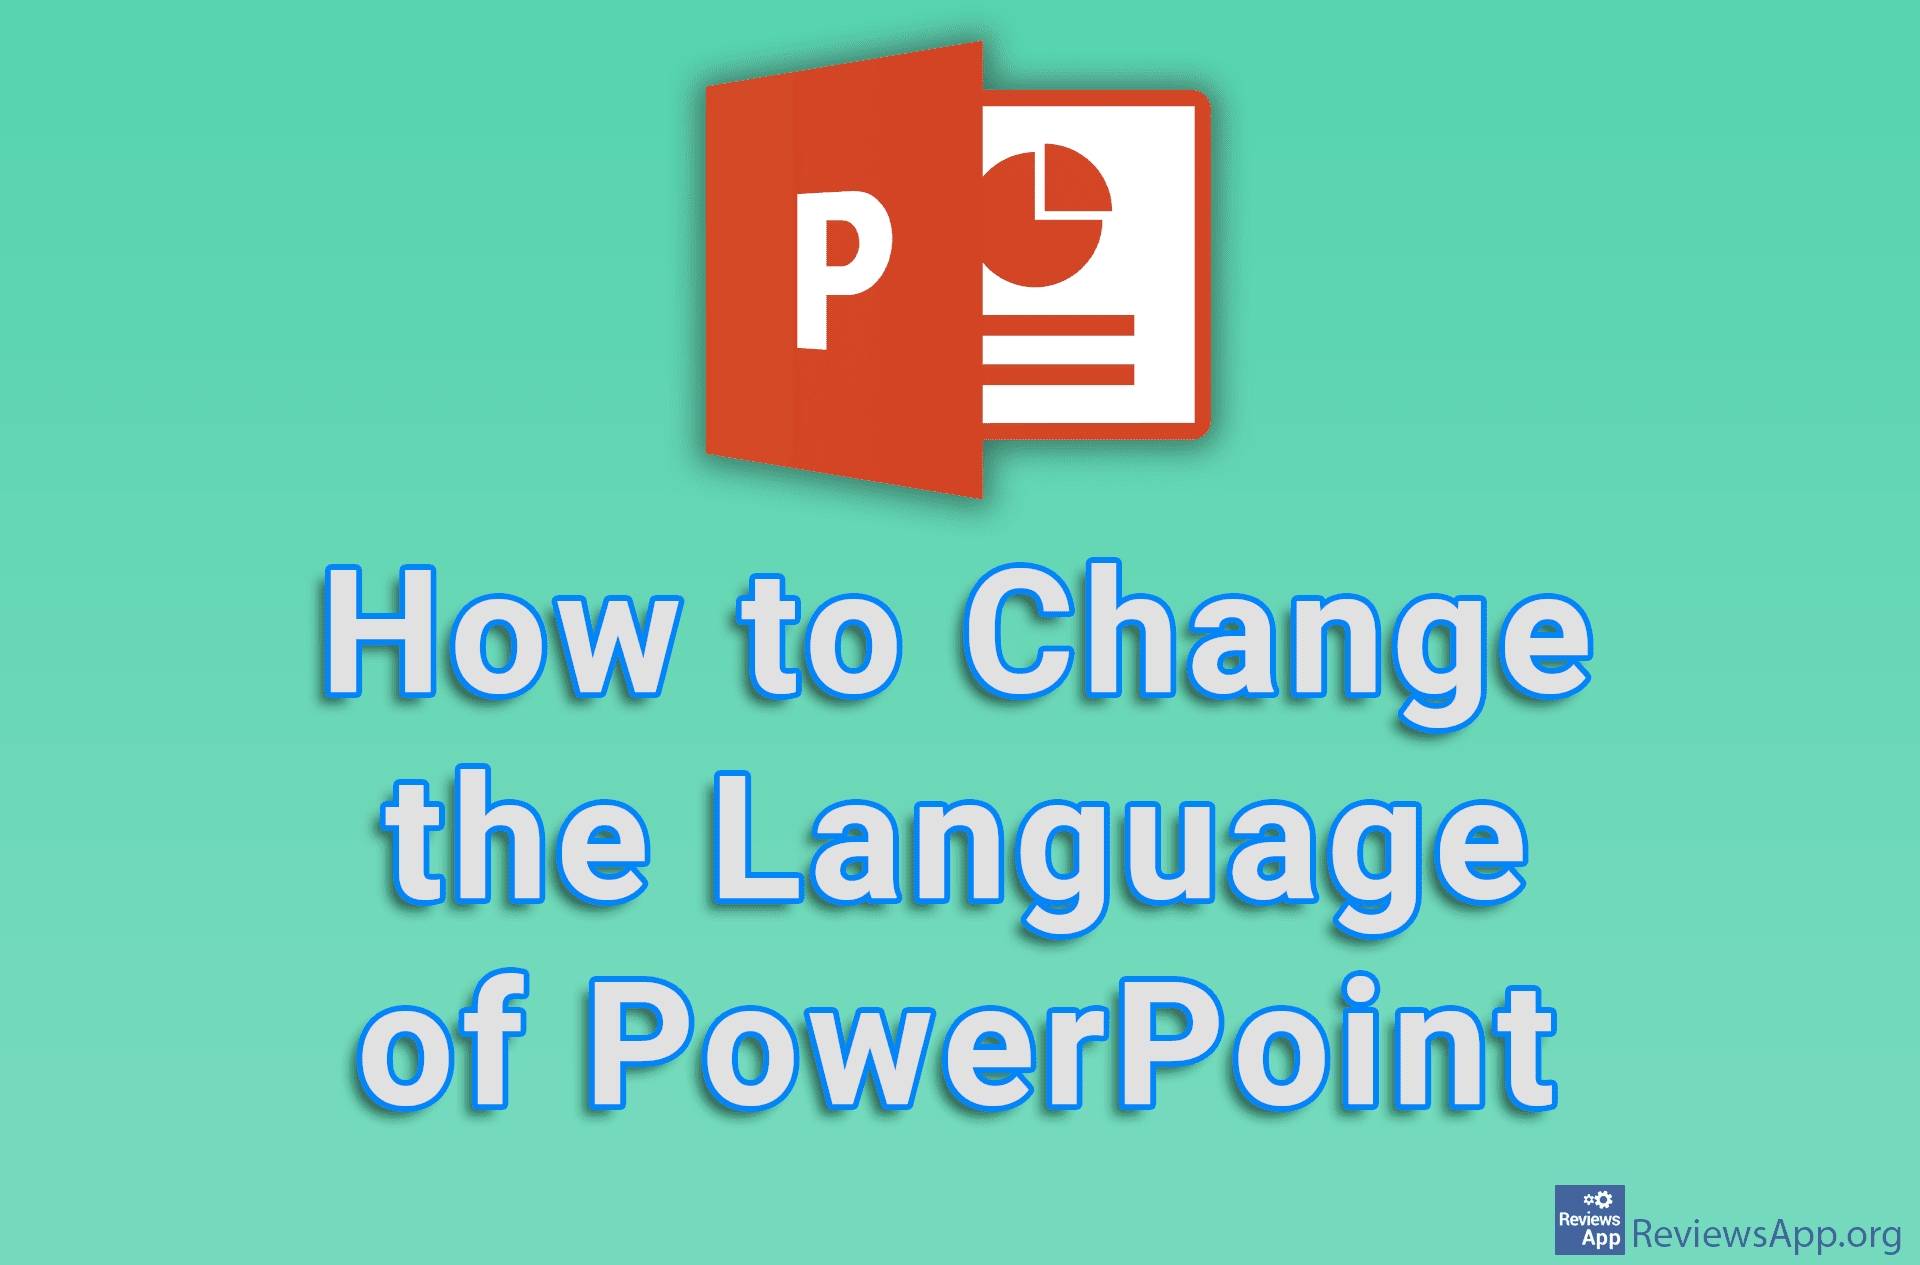 How to Change the Language of PowerPoint